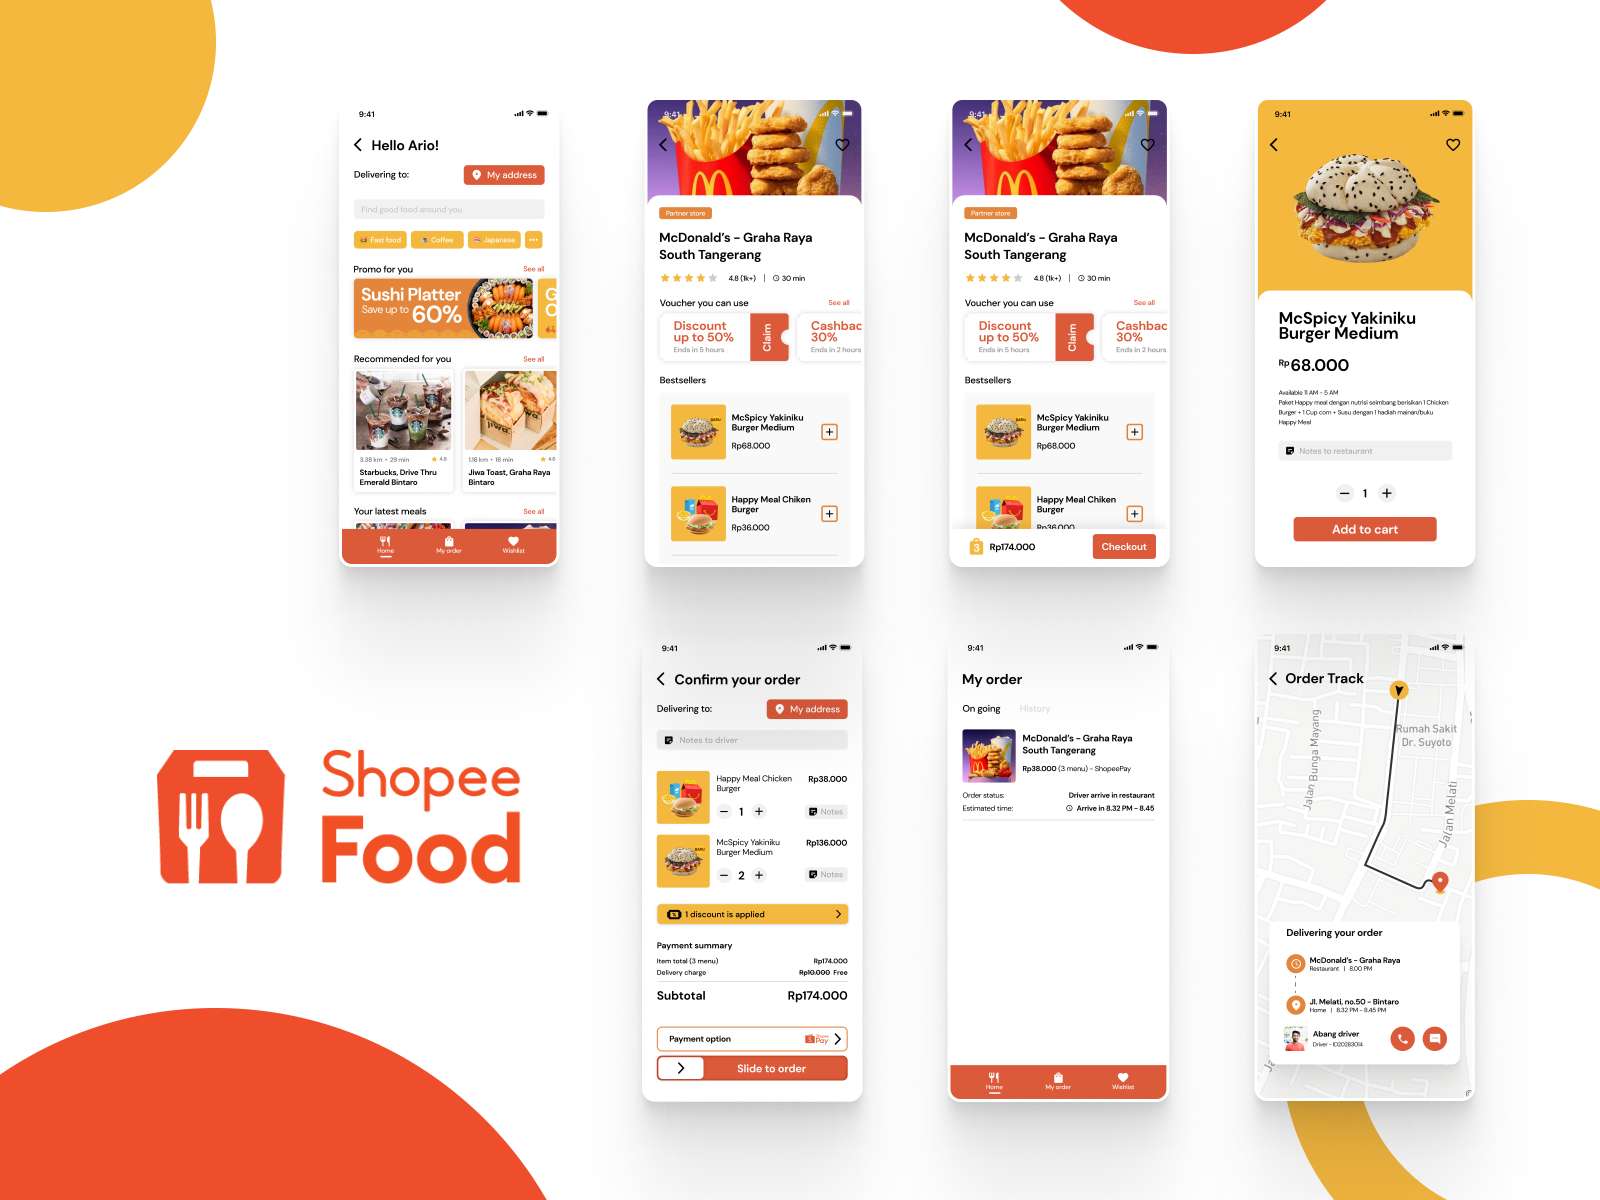 Shopee - key information about the Asian marketplace